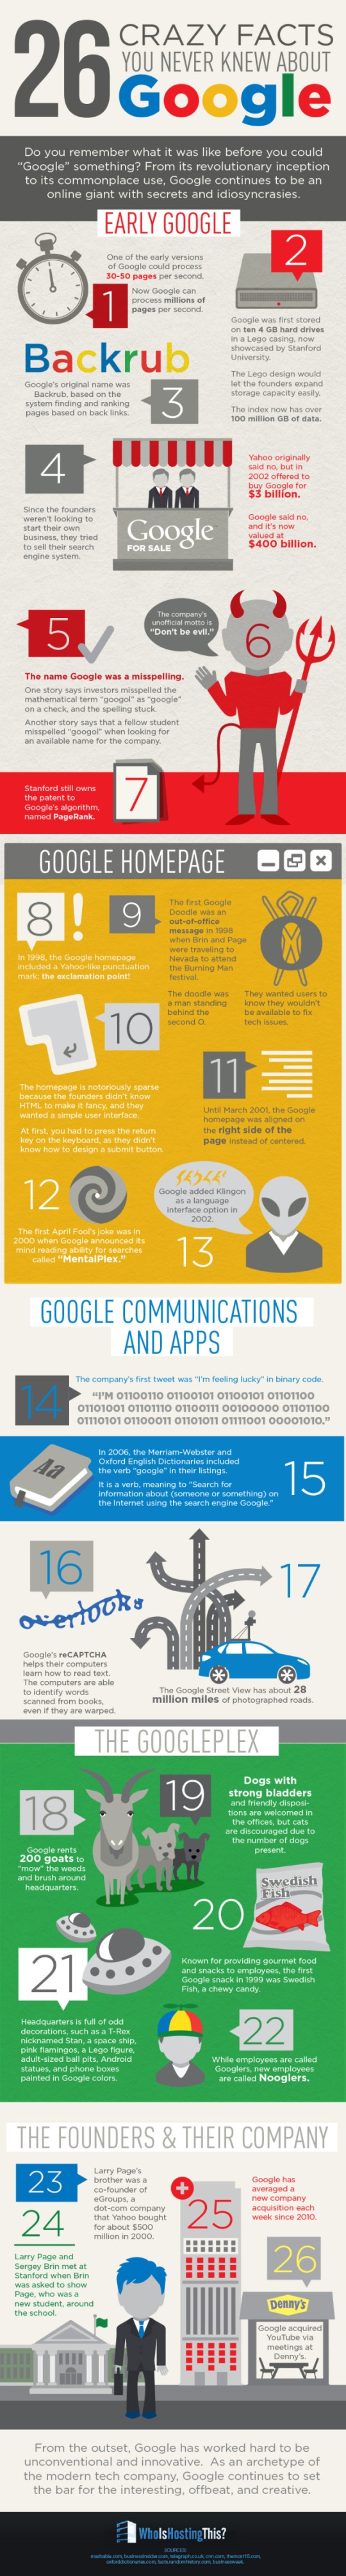 interesting facts about google